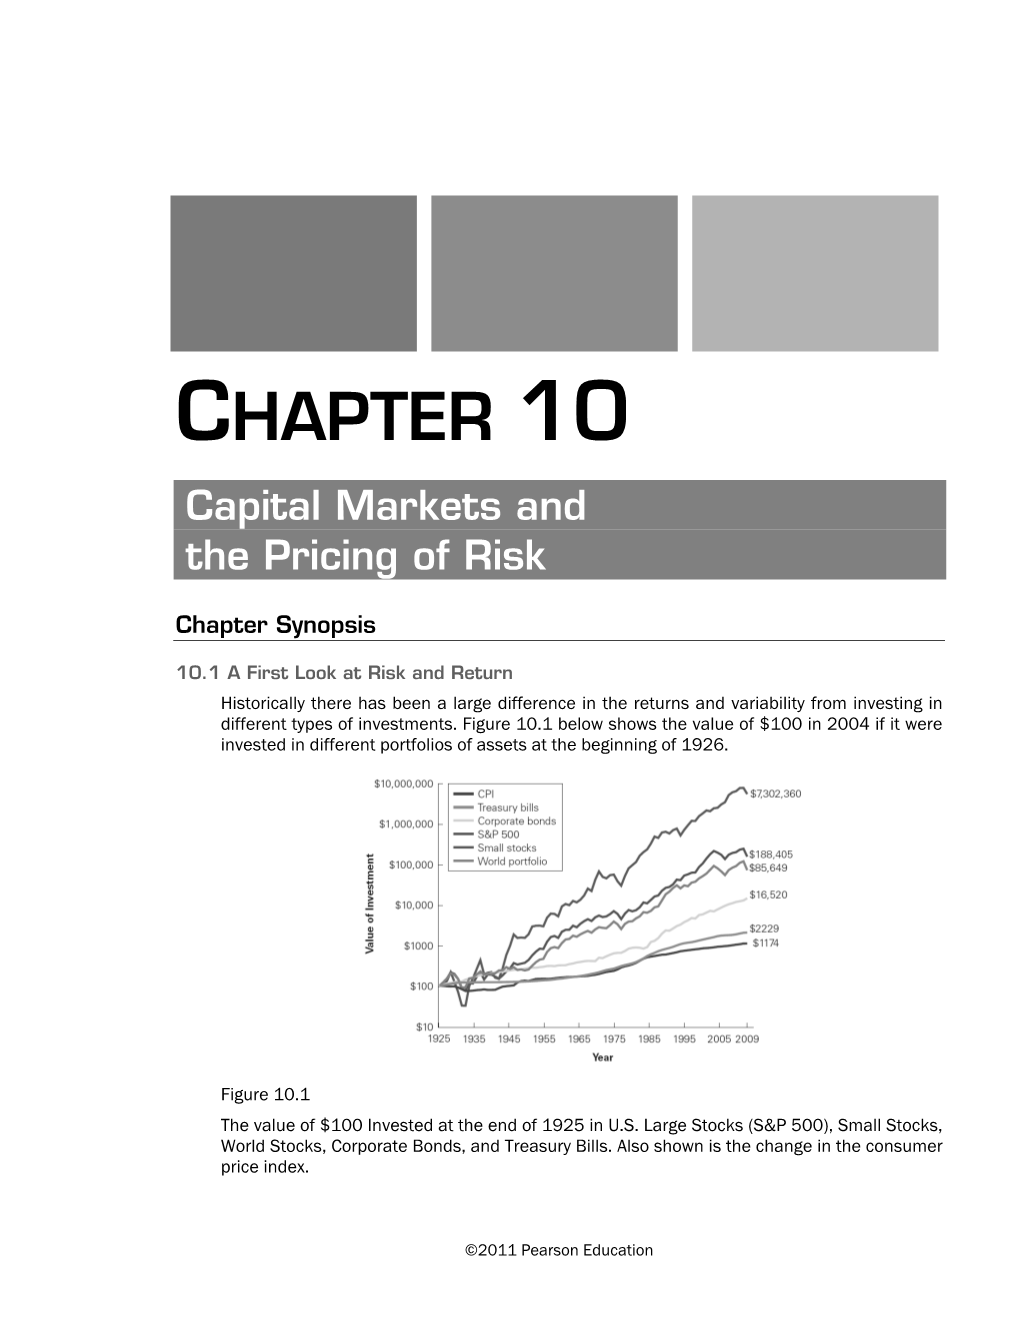 CHAPTER 10 Capital Markets and the Pricing of Risk